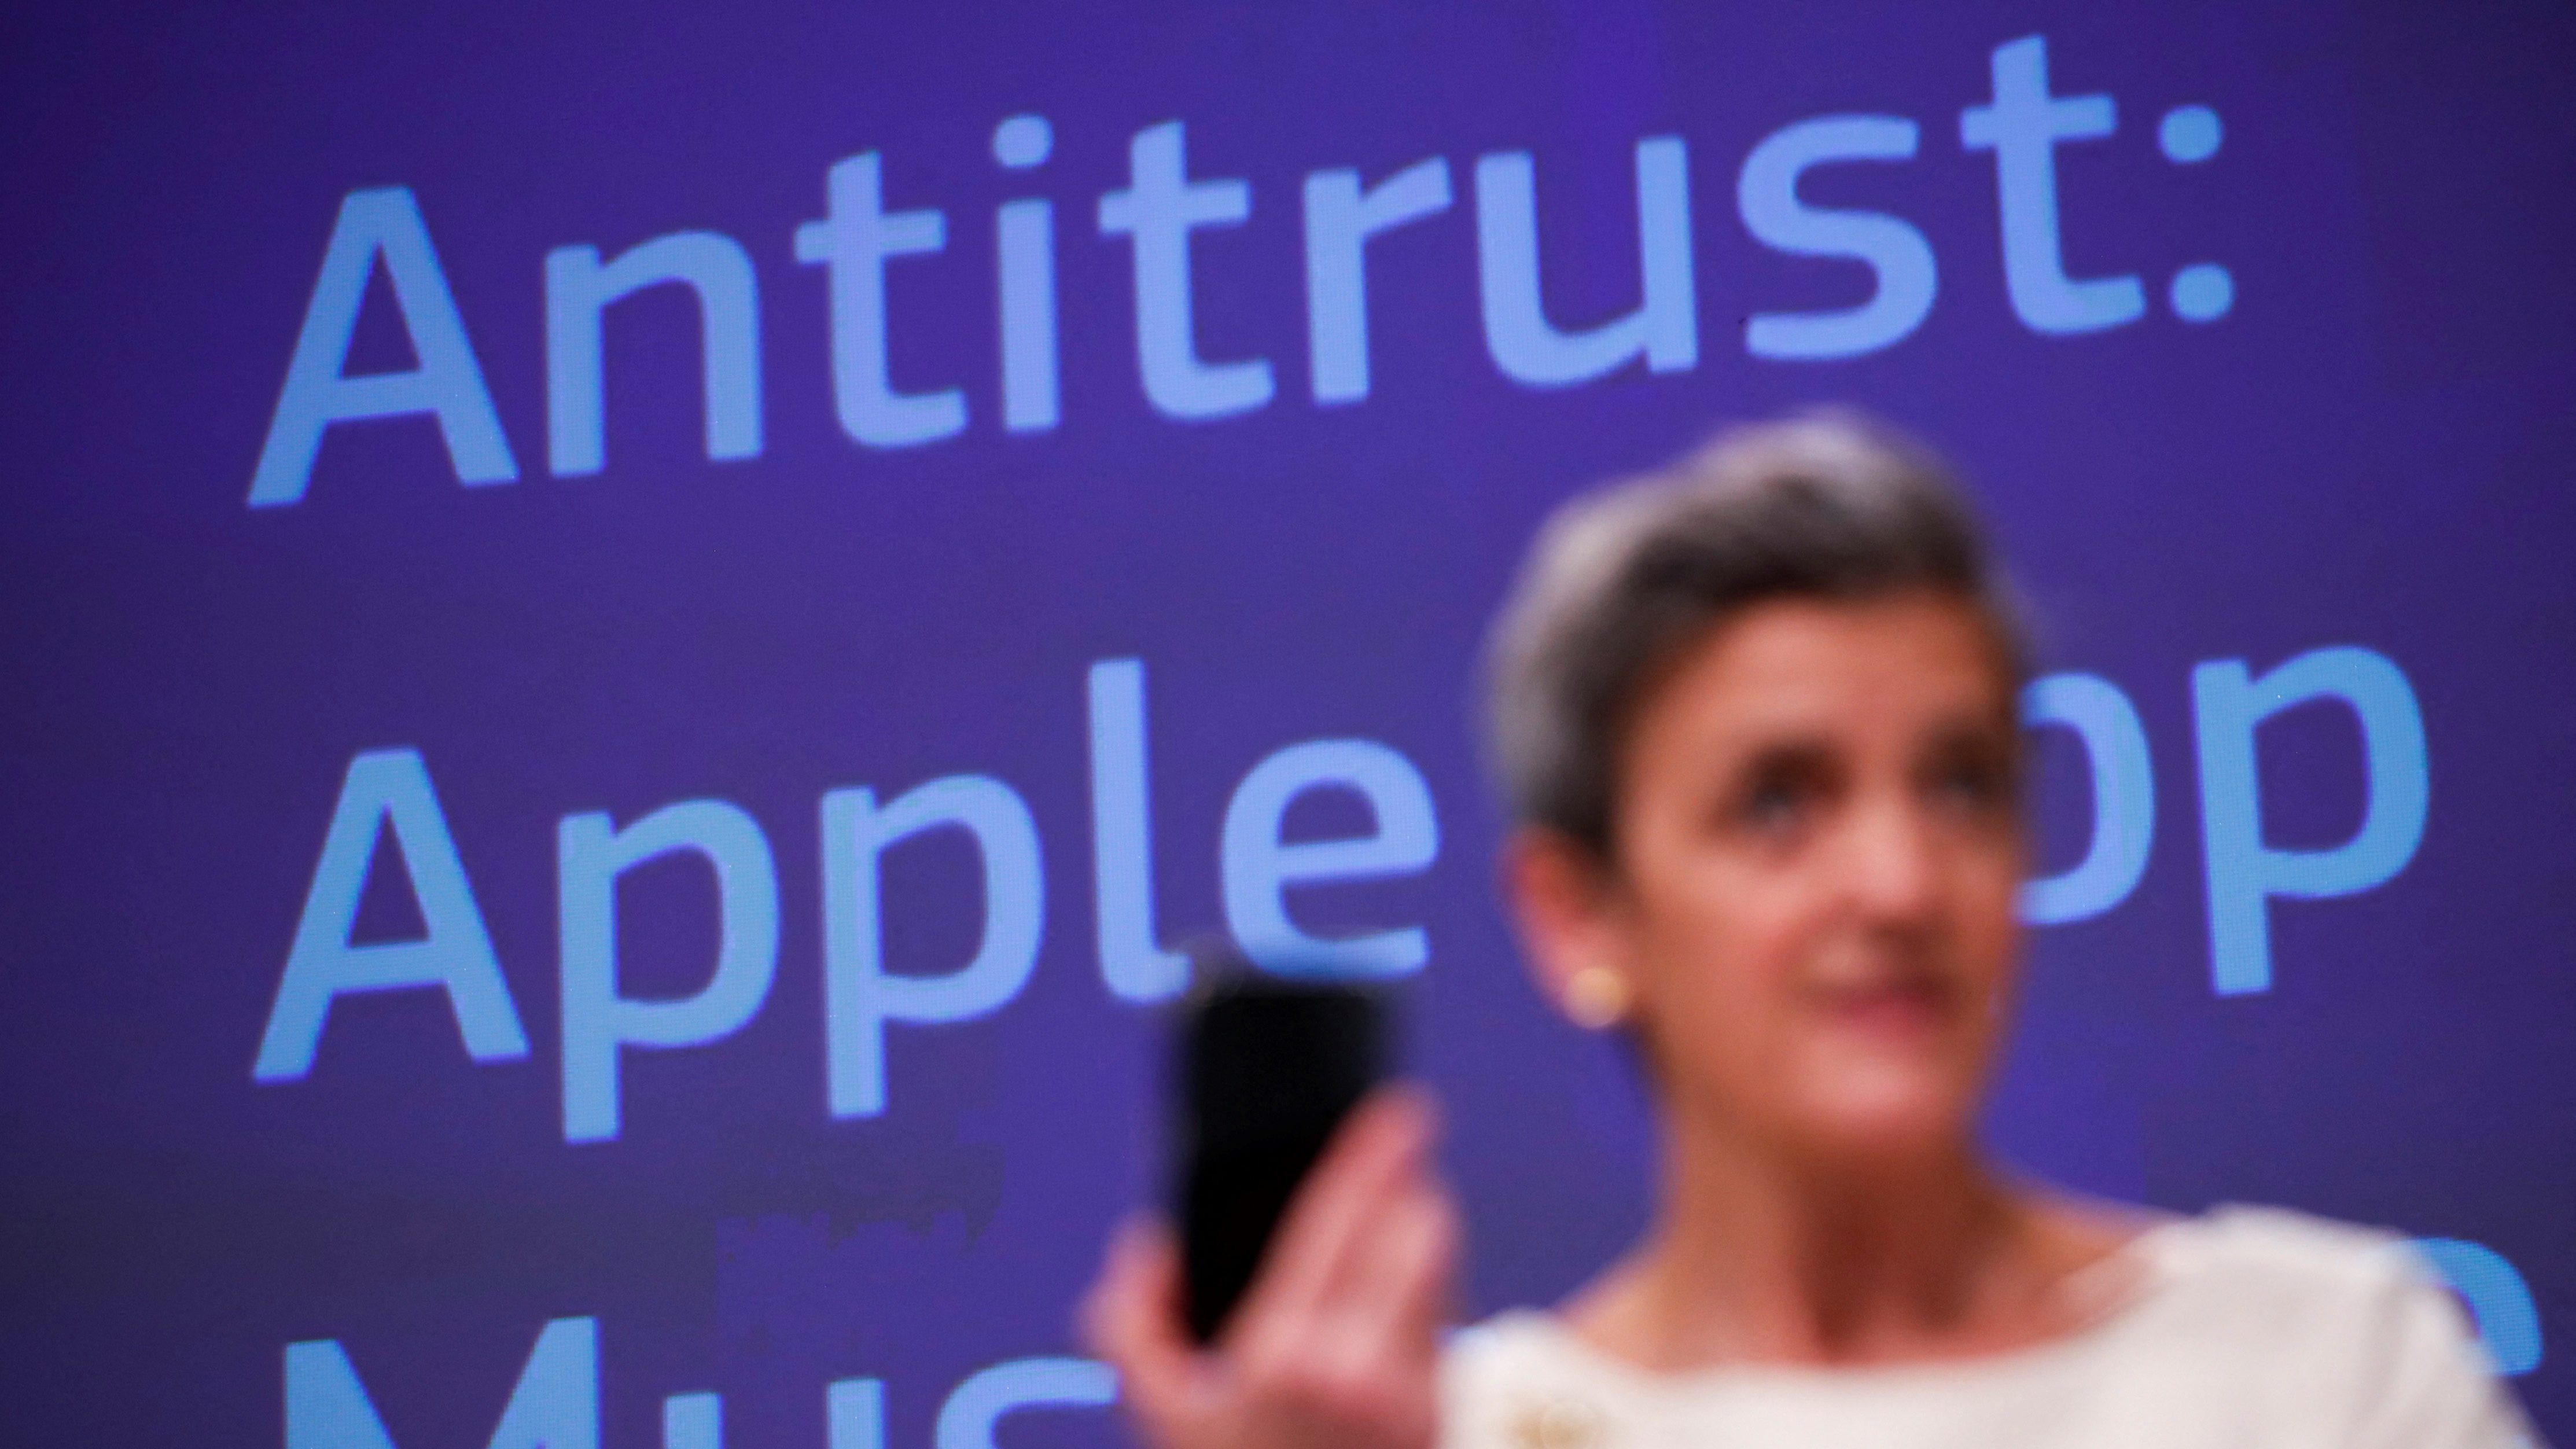 European Commissioner for Europe fit for the Digital Age, Margrethe Vestager, gestures as she speaks during an online news conference on Apple antitrust case at the EU headquarters in Brussels, on April 30, 2021